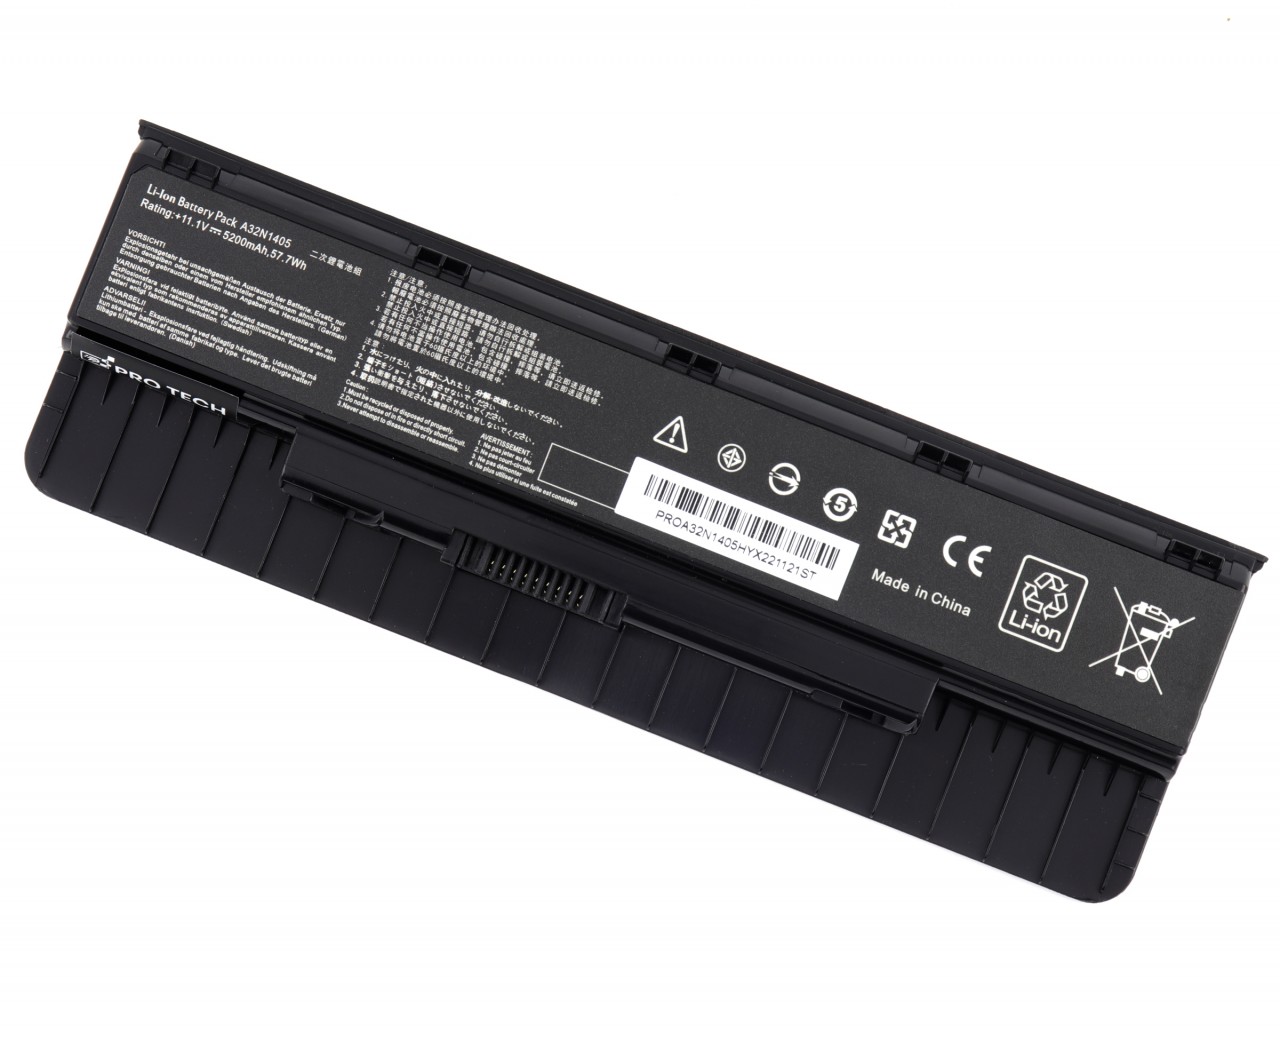 Baterie Asus N56V 57.7Wh / 5200mAh Protech High Quality Replacement